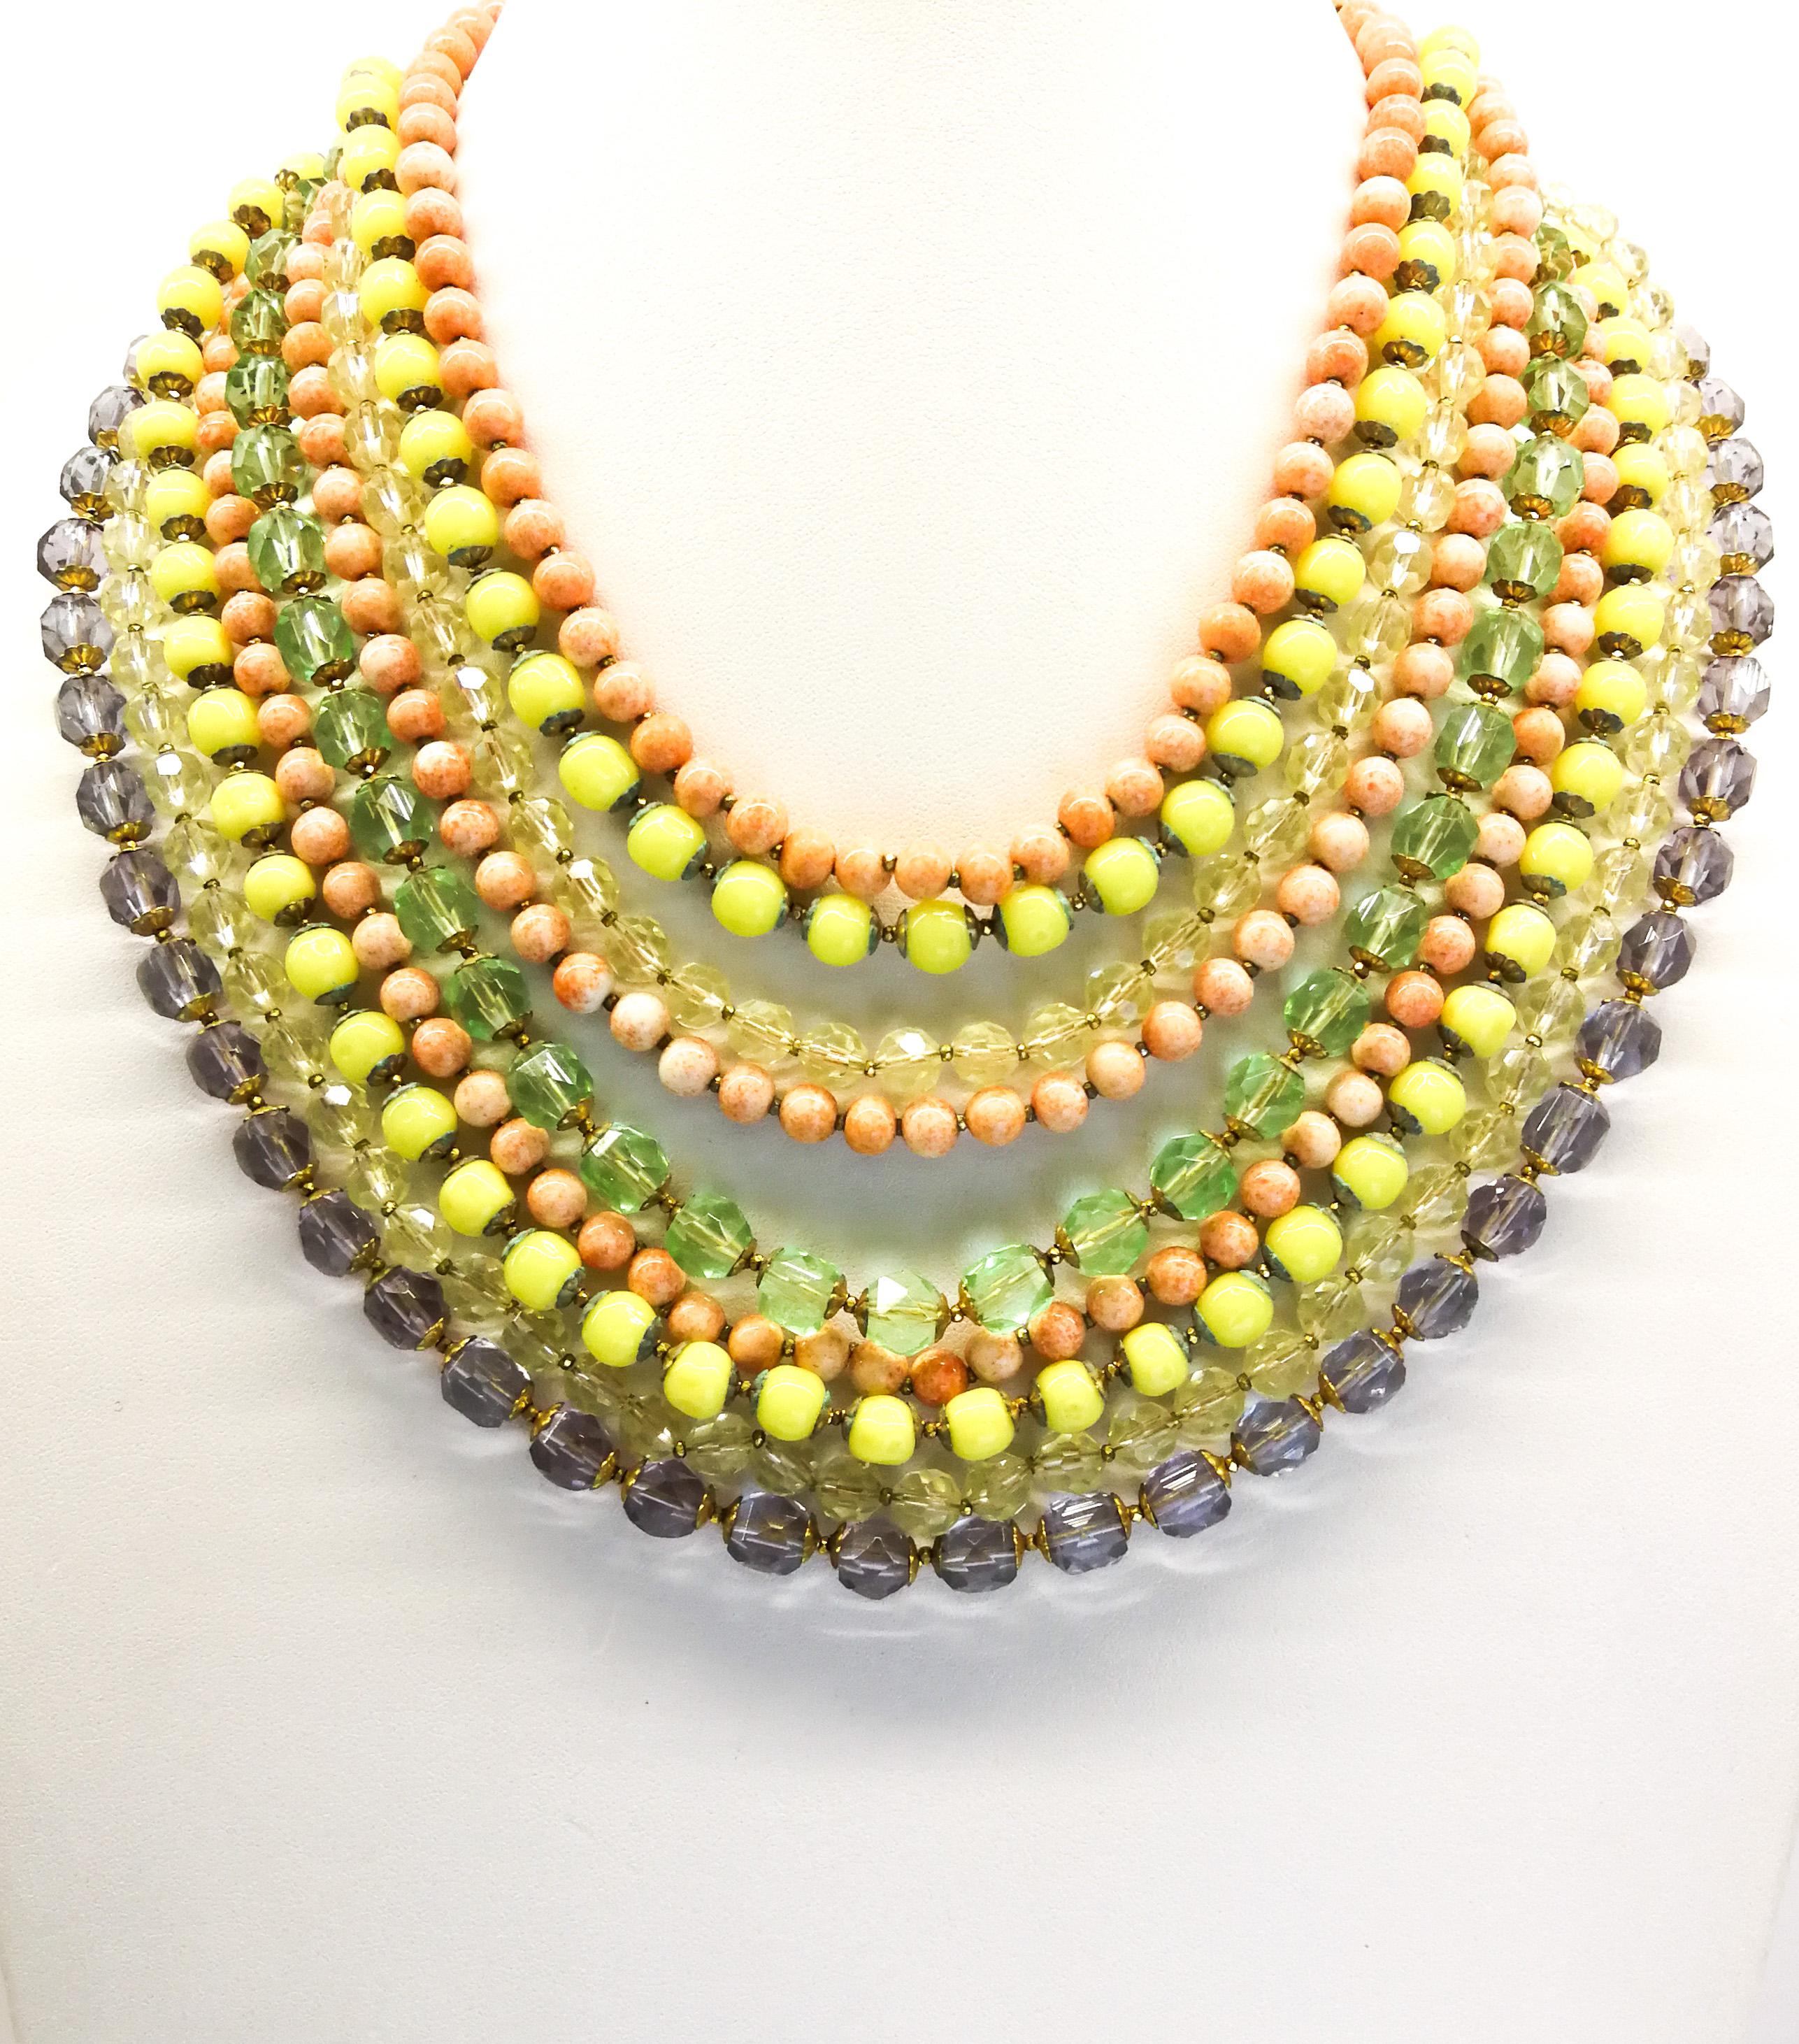 A bright and cheerful large glass bead necklace and matching earrings, with clear faceted and opaque smooth beads, a Summery mix of coral, lemon, citrine , amethyst and mint hues, falling one row loosely on top of the other, from the 1950s. The